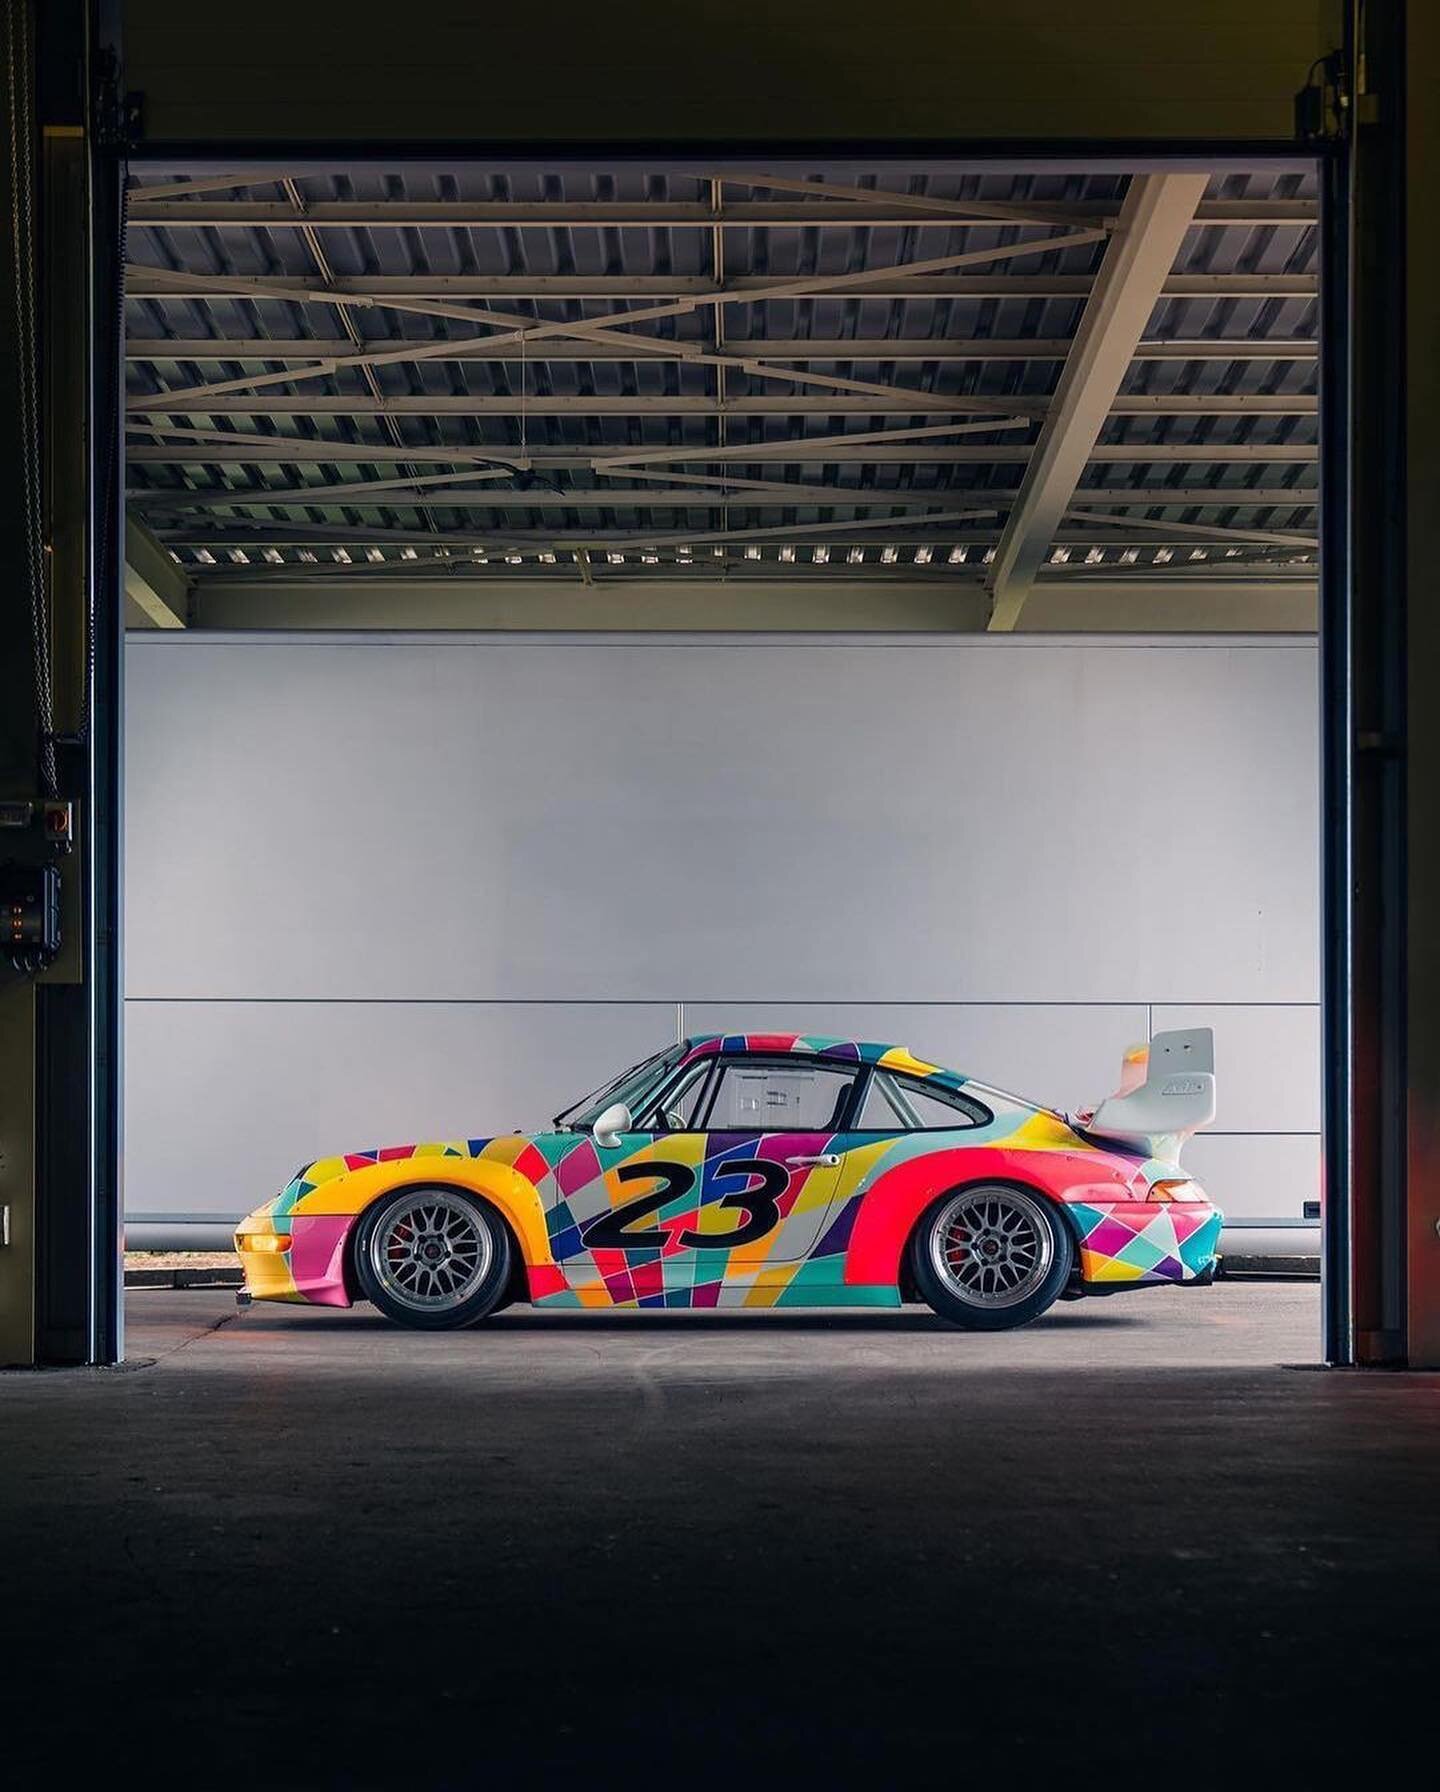 Always stand out 👀

Don&rsquo;t forget to grab your FlatSix Show tickets now on the website 🎟
Both Show Car and General Public tickets are available.
📸 @alexpenfold
#FlatSix #Porsche #Goodwood